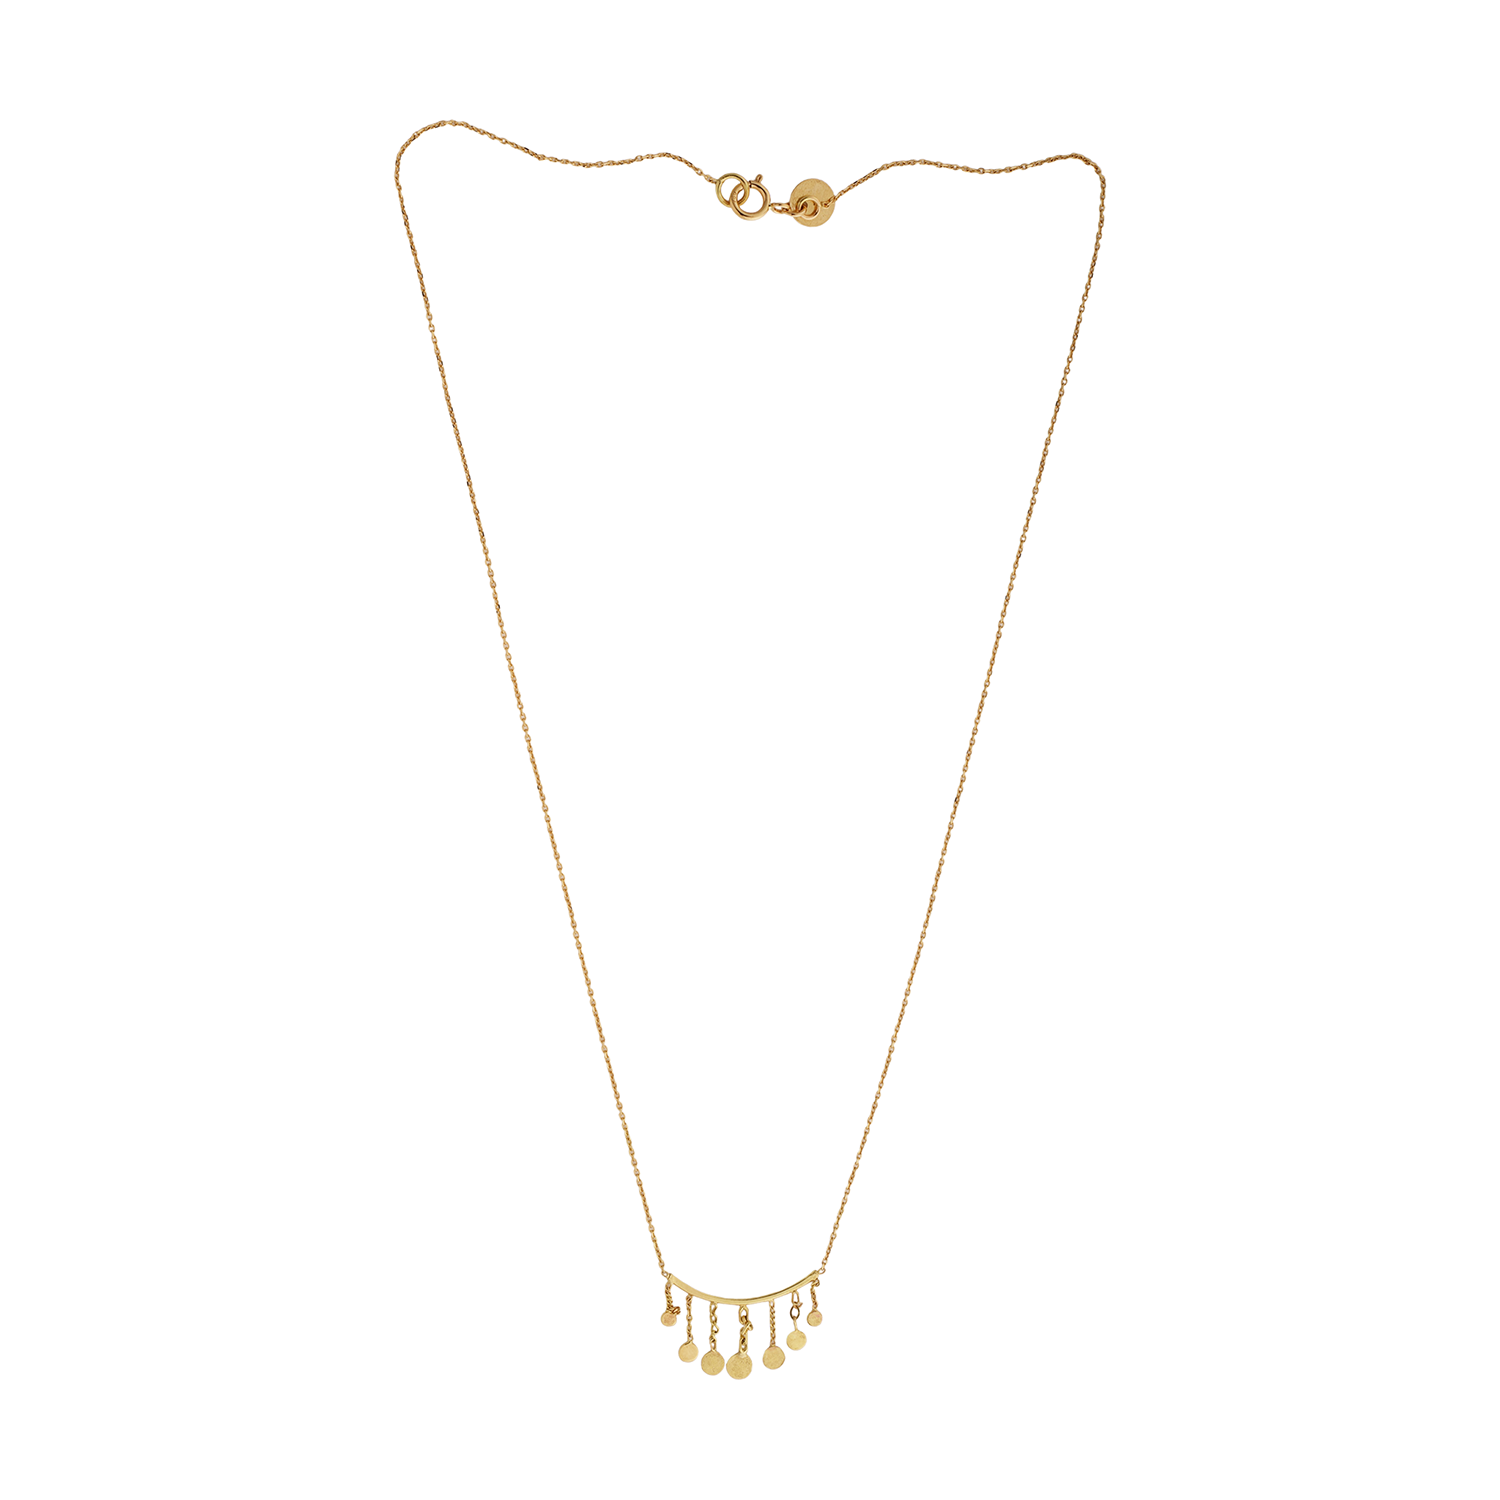 Sweet Pea 18ct gold Ancient Worlds chain drop necklace.